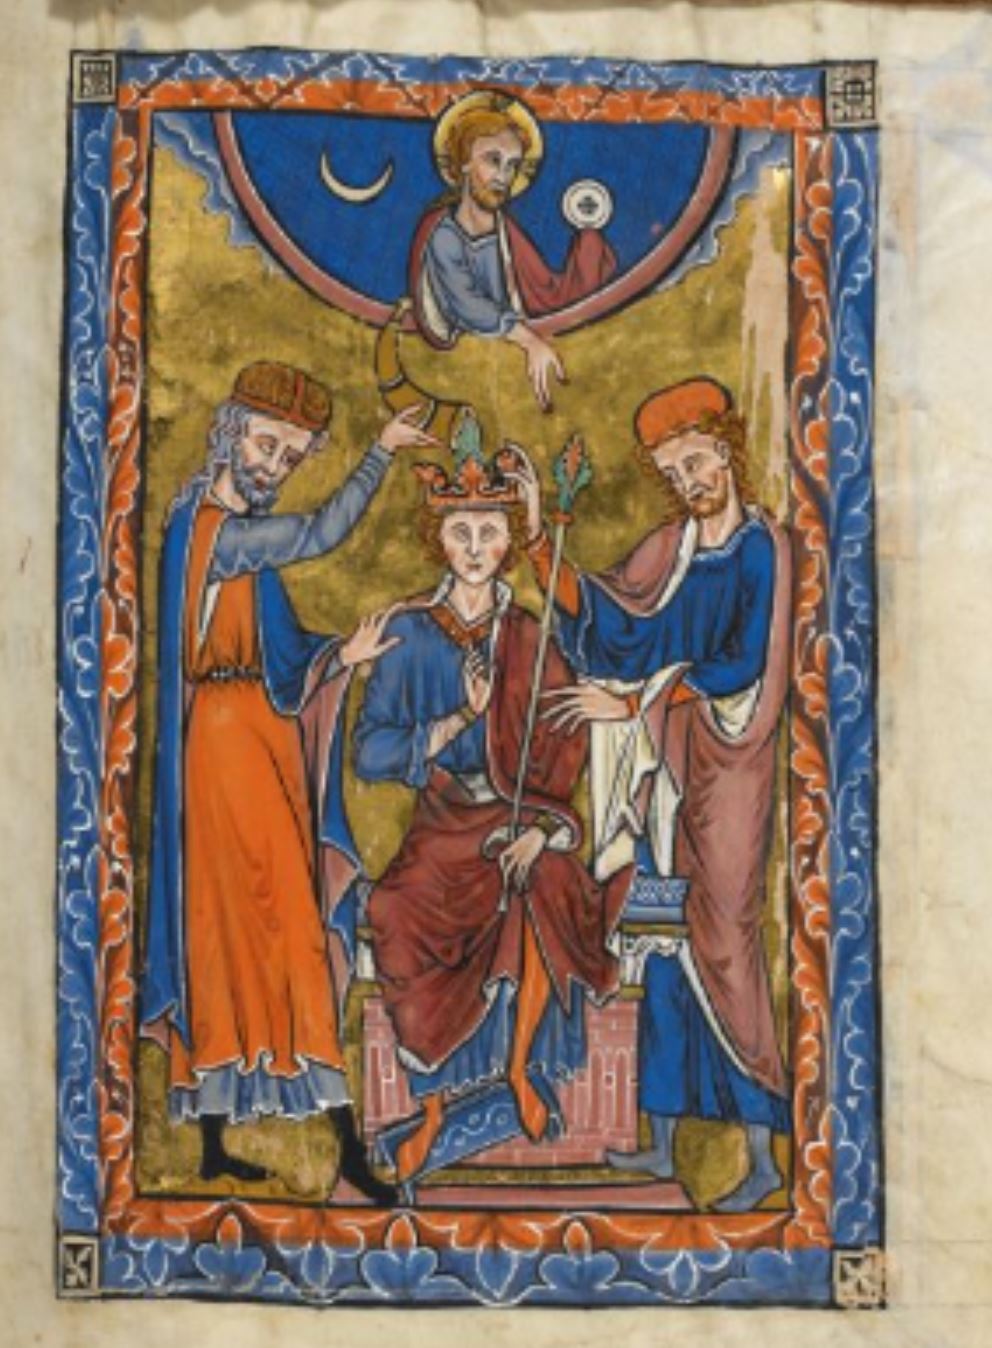 1260 Rutland Psalter Anointing and Crowning of King David, with Christ above flanked by the Sun (marked as a Host) and Moon, before Psalm 26 BL Add MS 62925 fol 29r